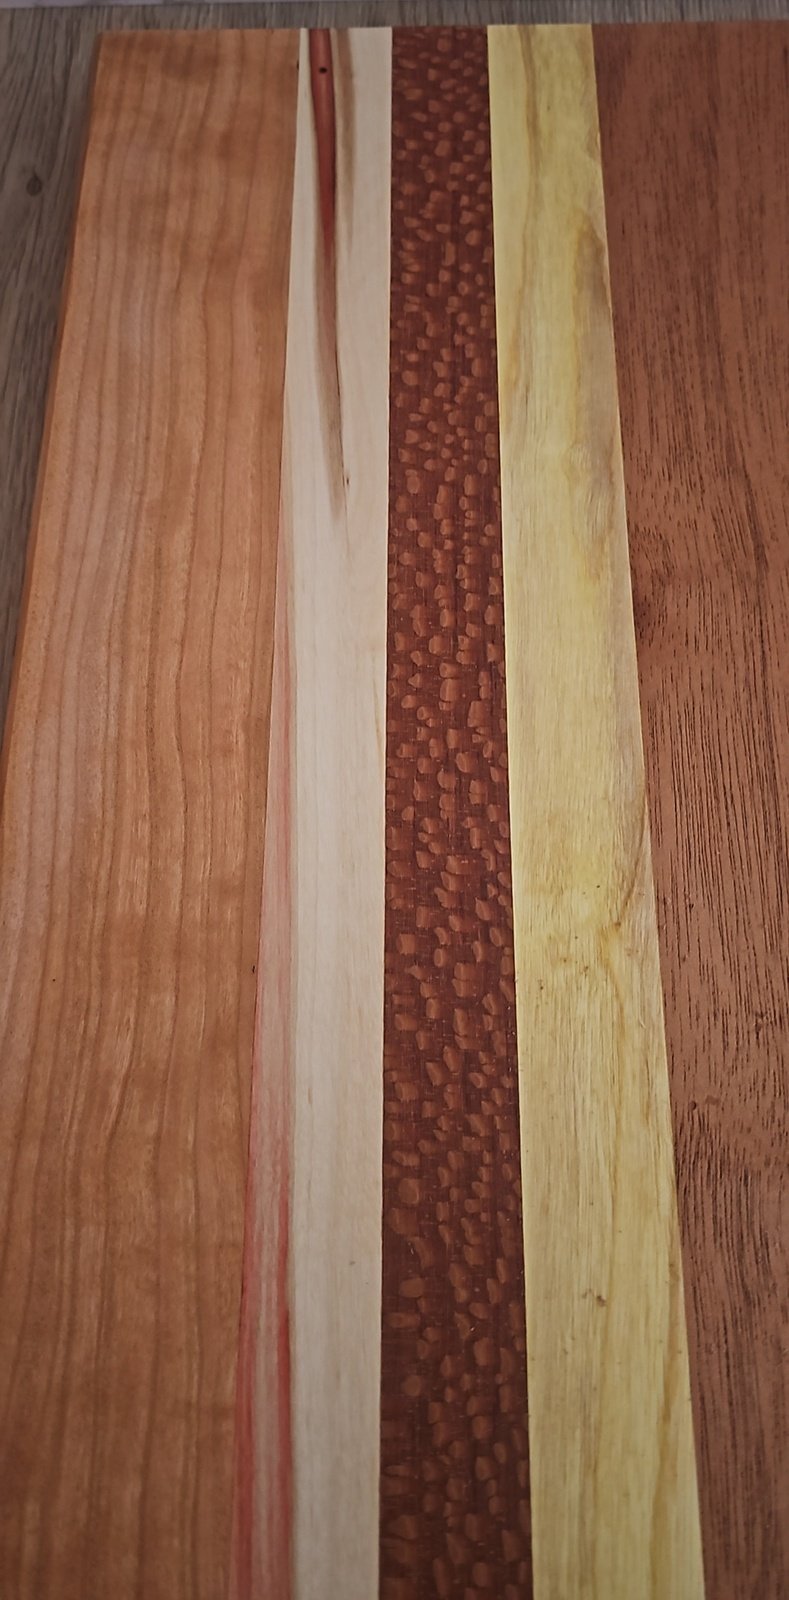 Cherry, Box Elder, Lace Wood and Mulberry Charcuterie Boards/Serving Board/Cutting Board